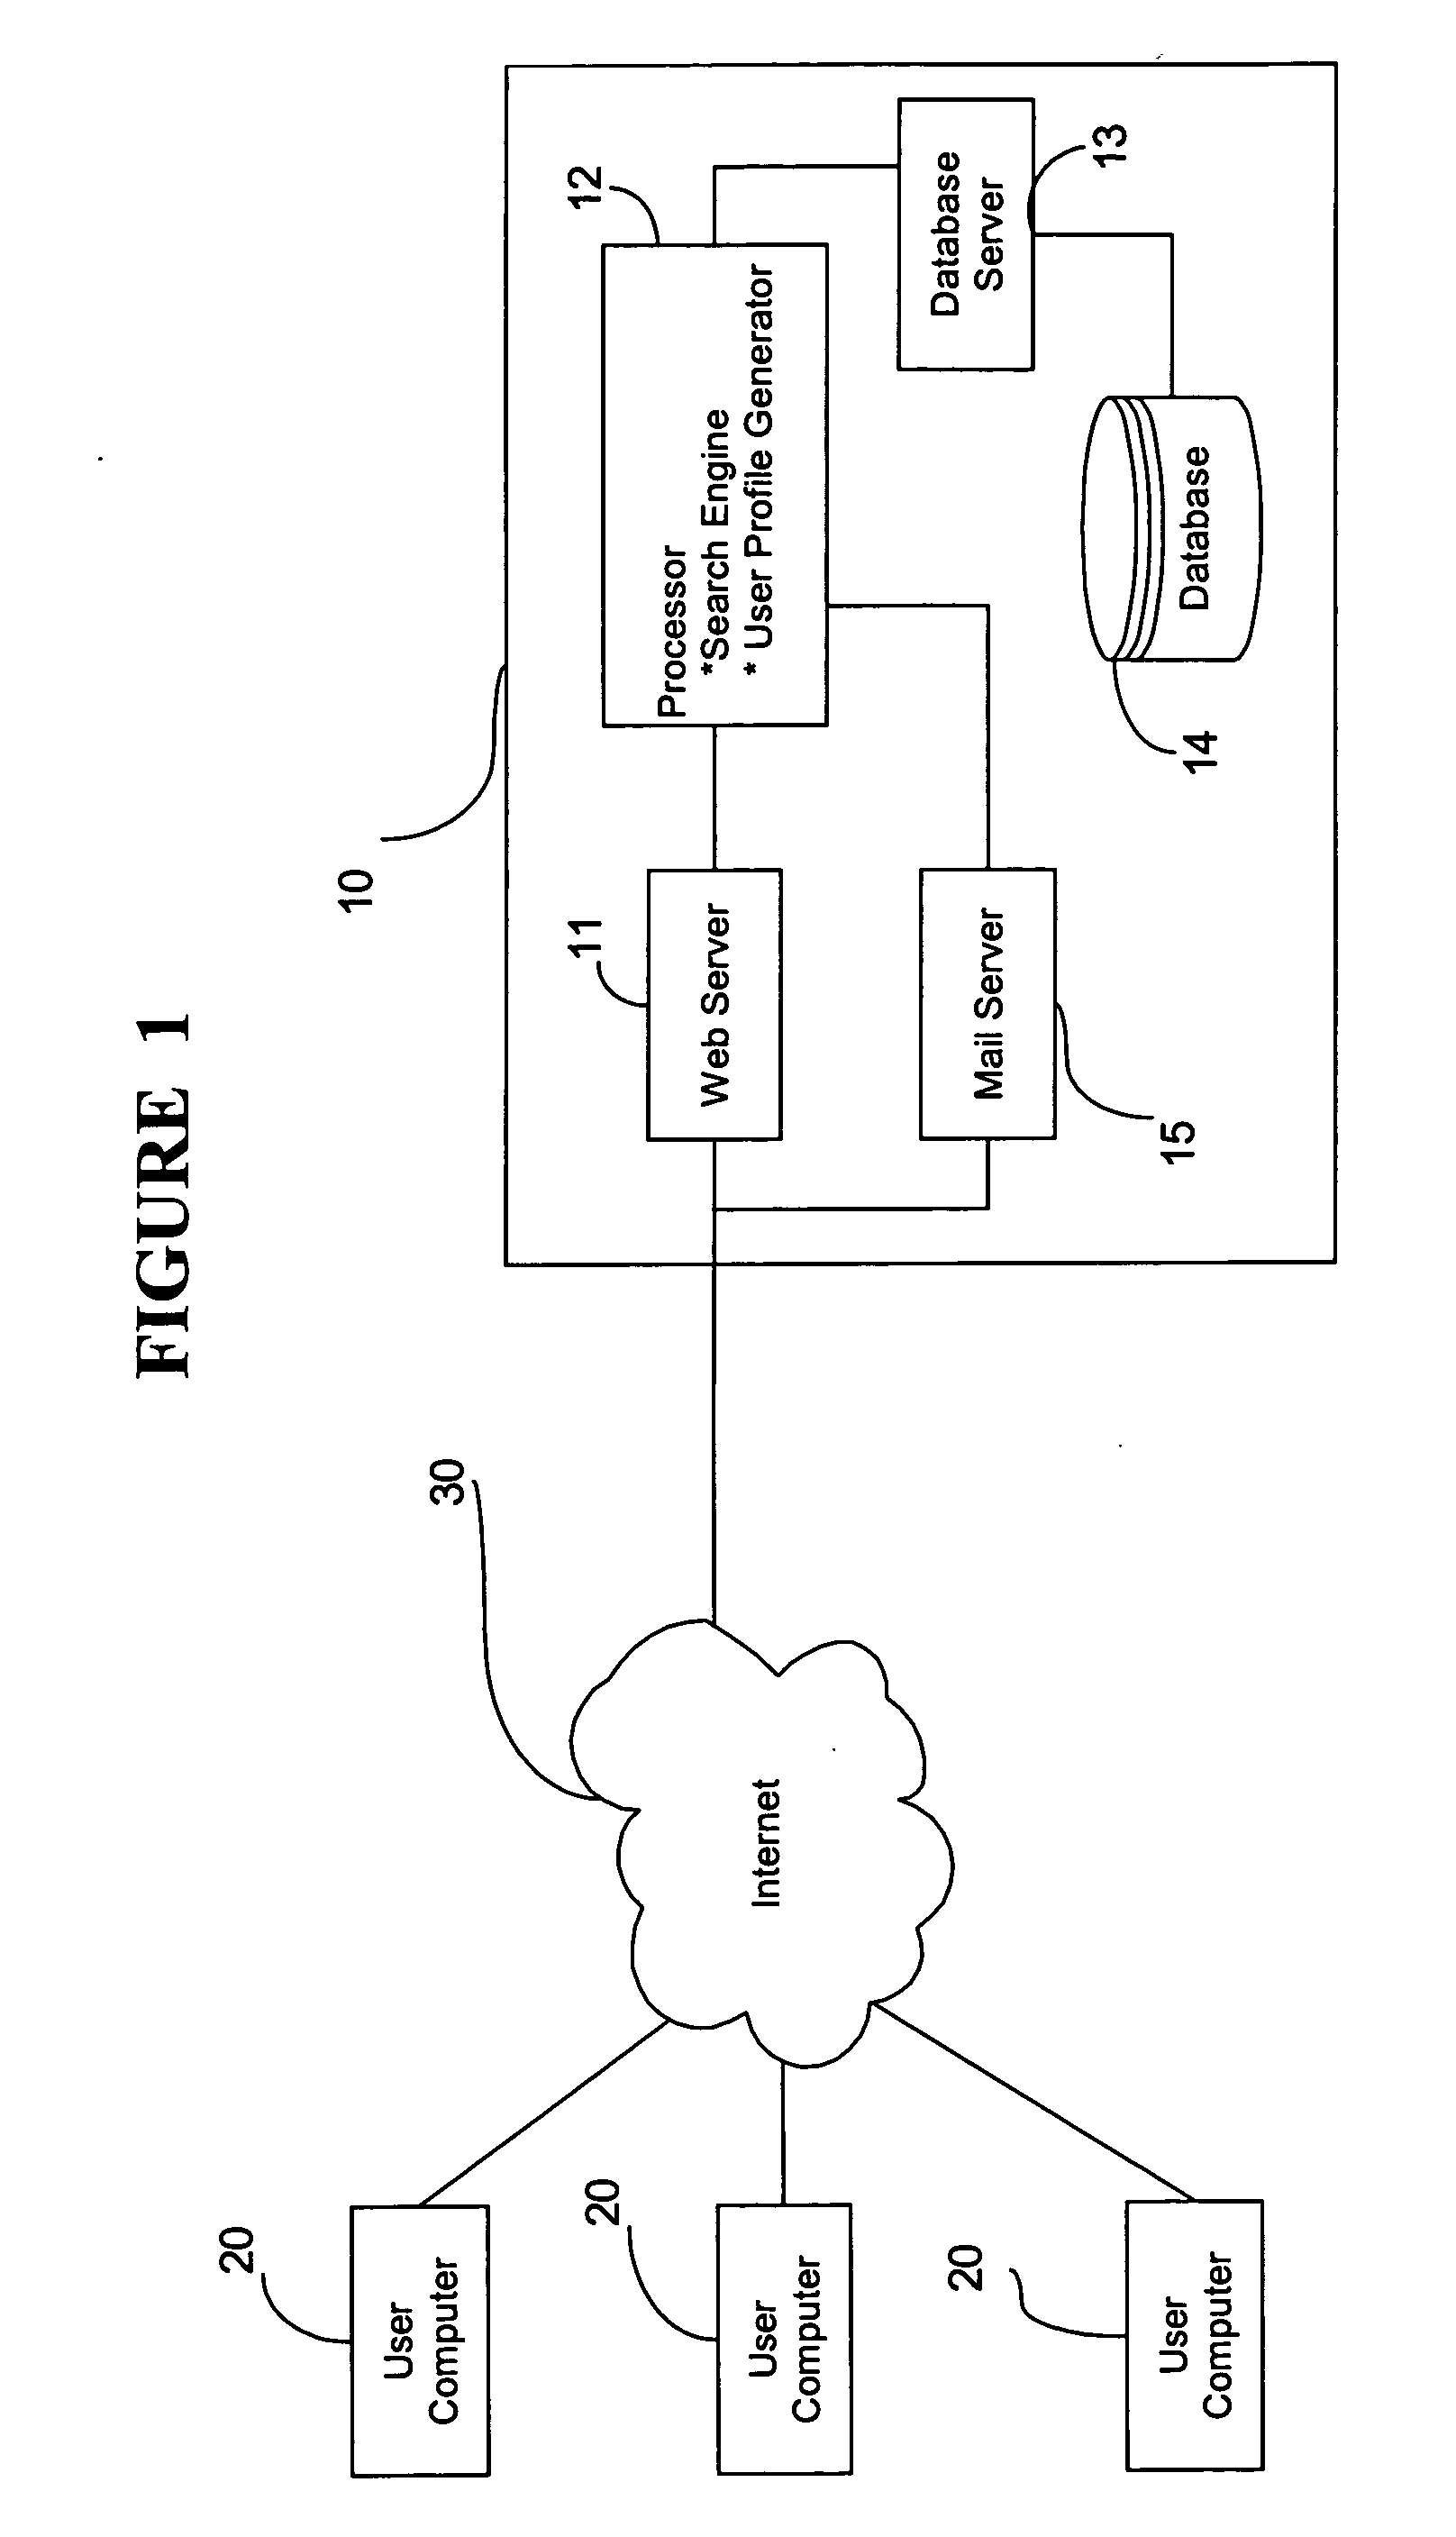 Automated system and method for determination and reporting of business development opportunities